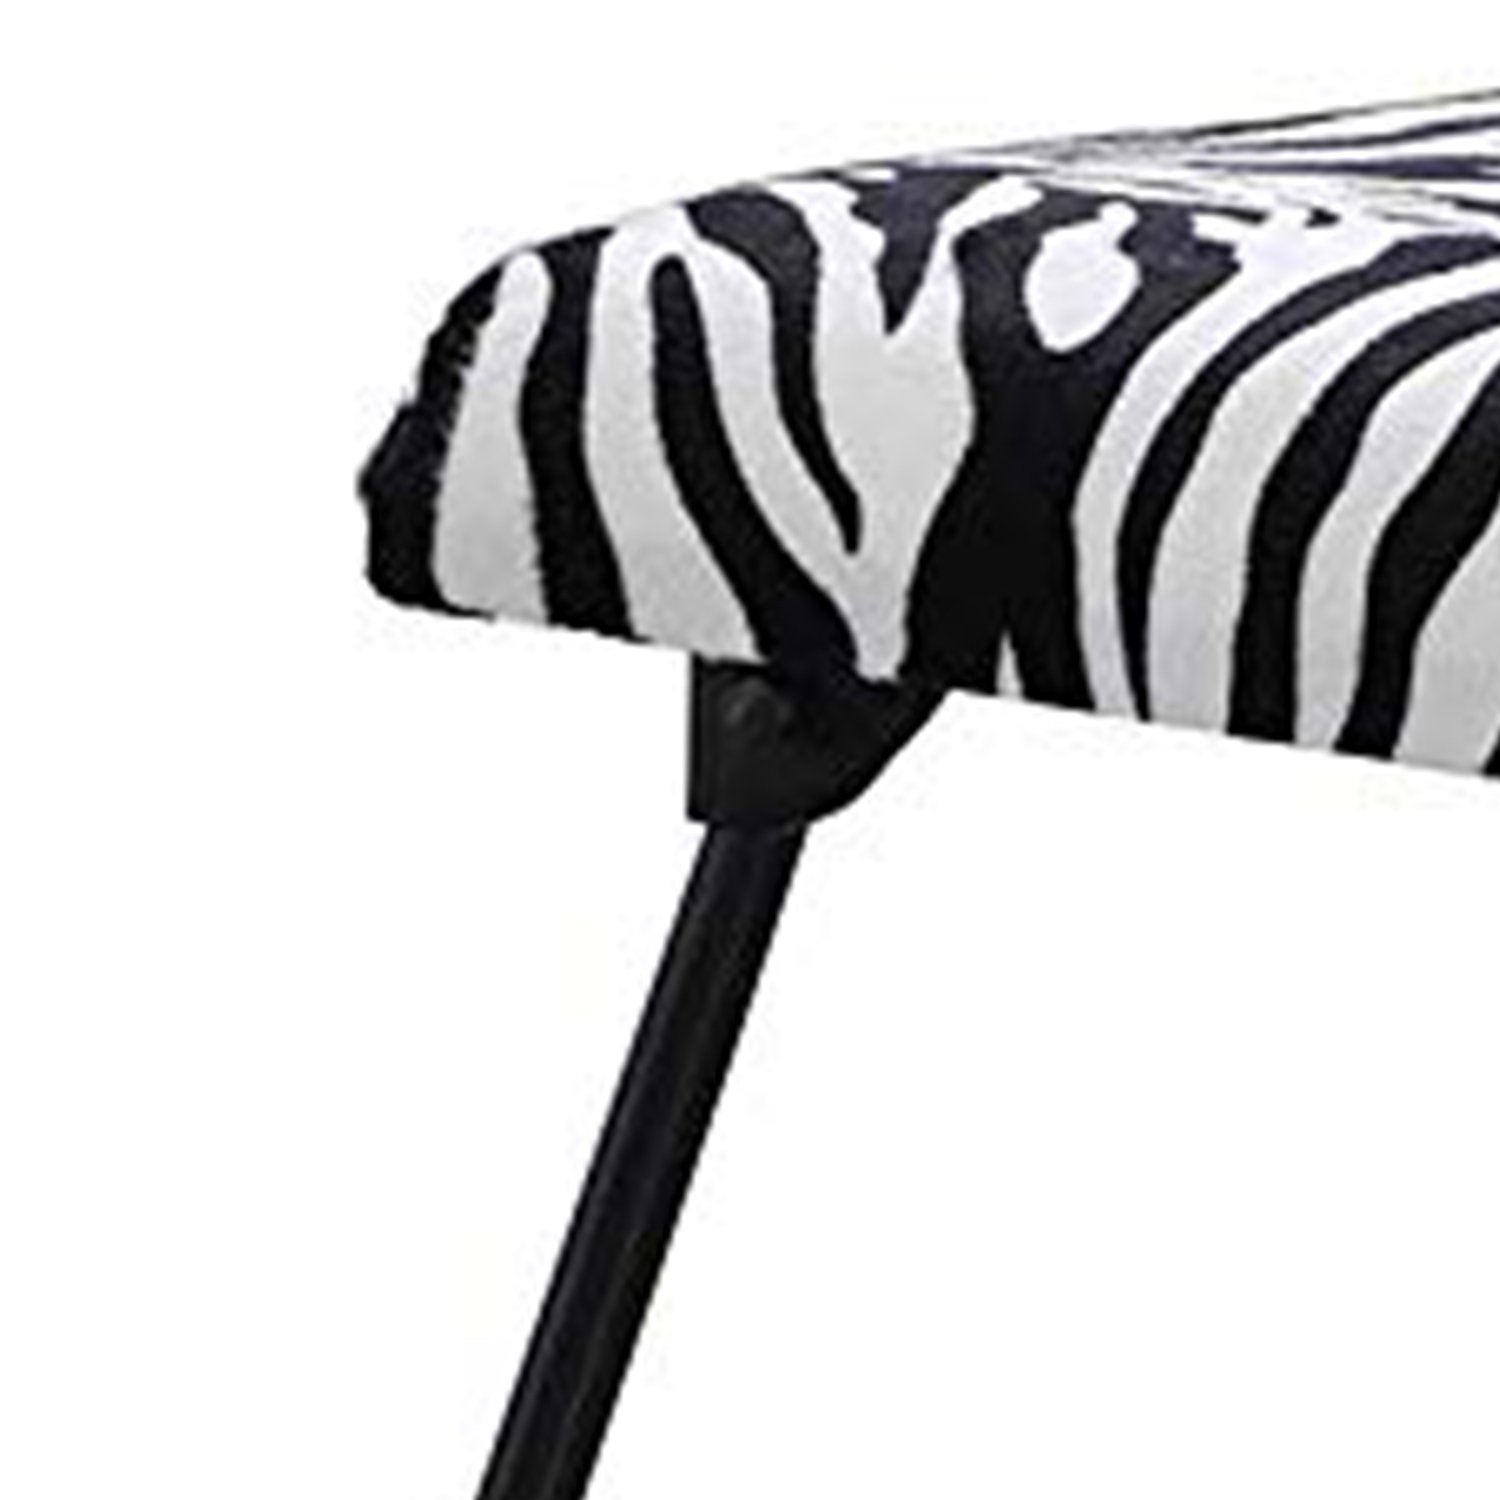 Accent Chair With Metal Foldable Legs And Animal Print, Black And White- Saltoro Sherpi